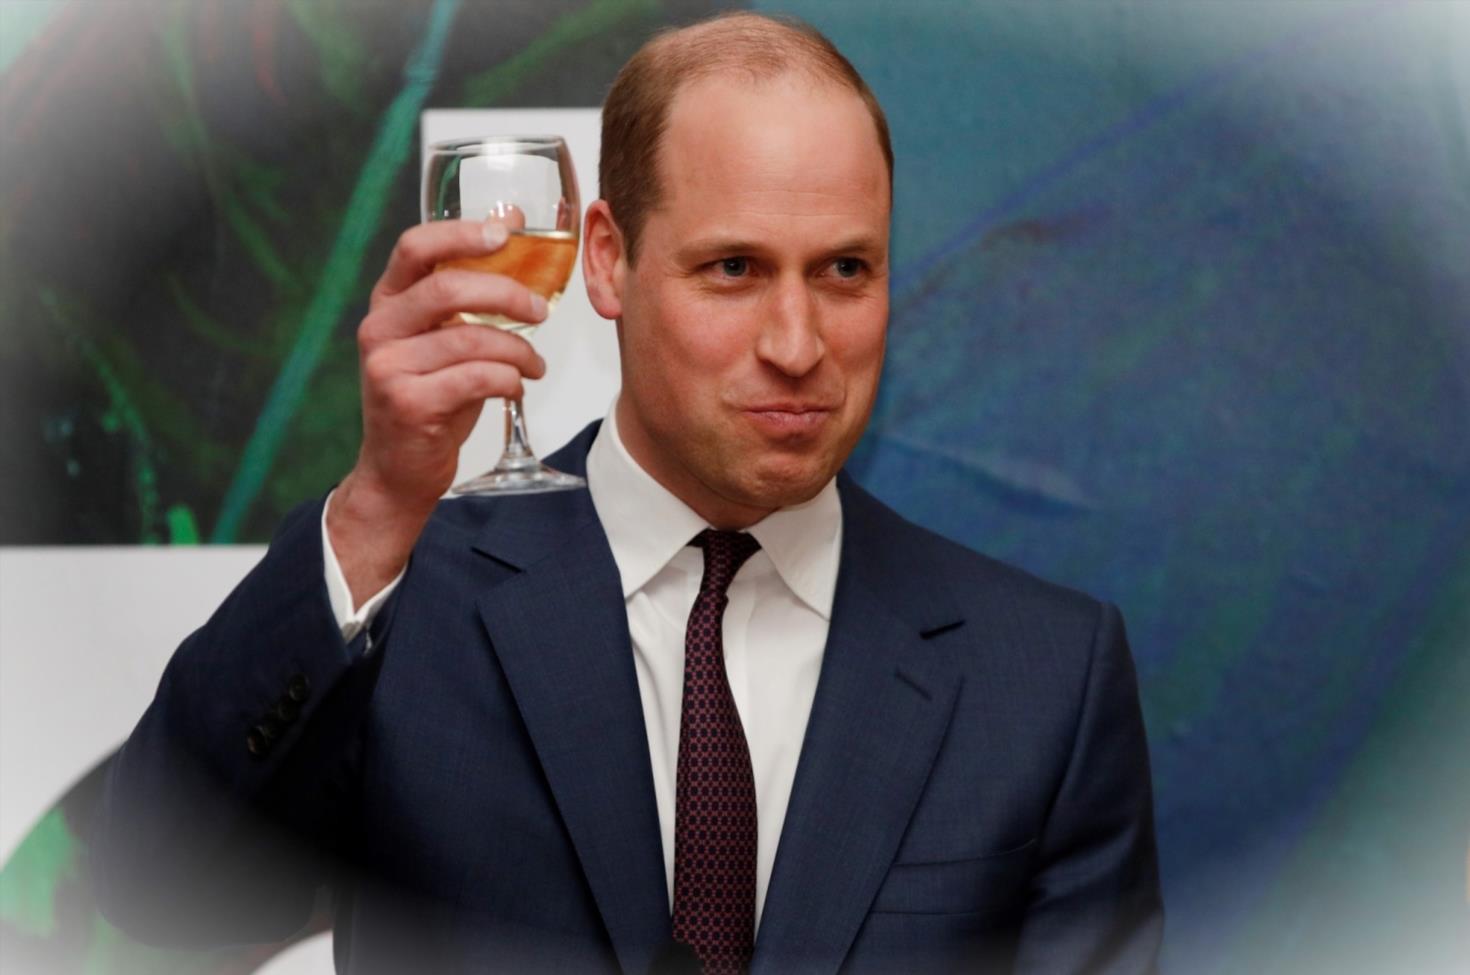 Prince William to Star in ITV Documentary on Homelessness Project2bsoHrN 5